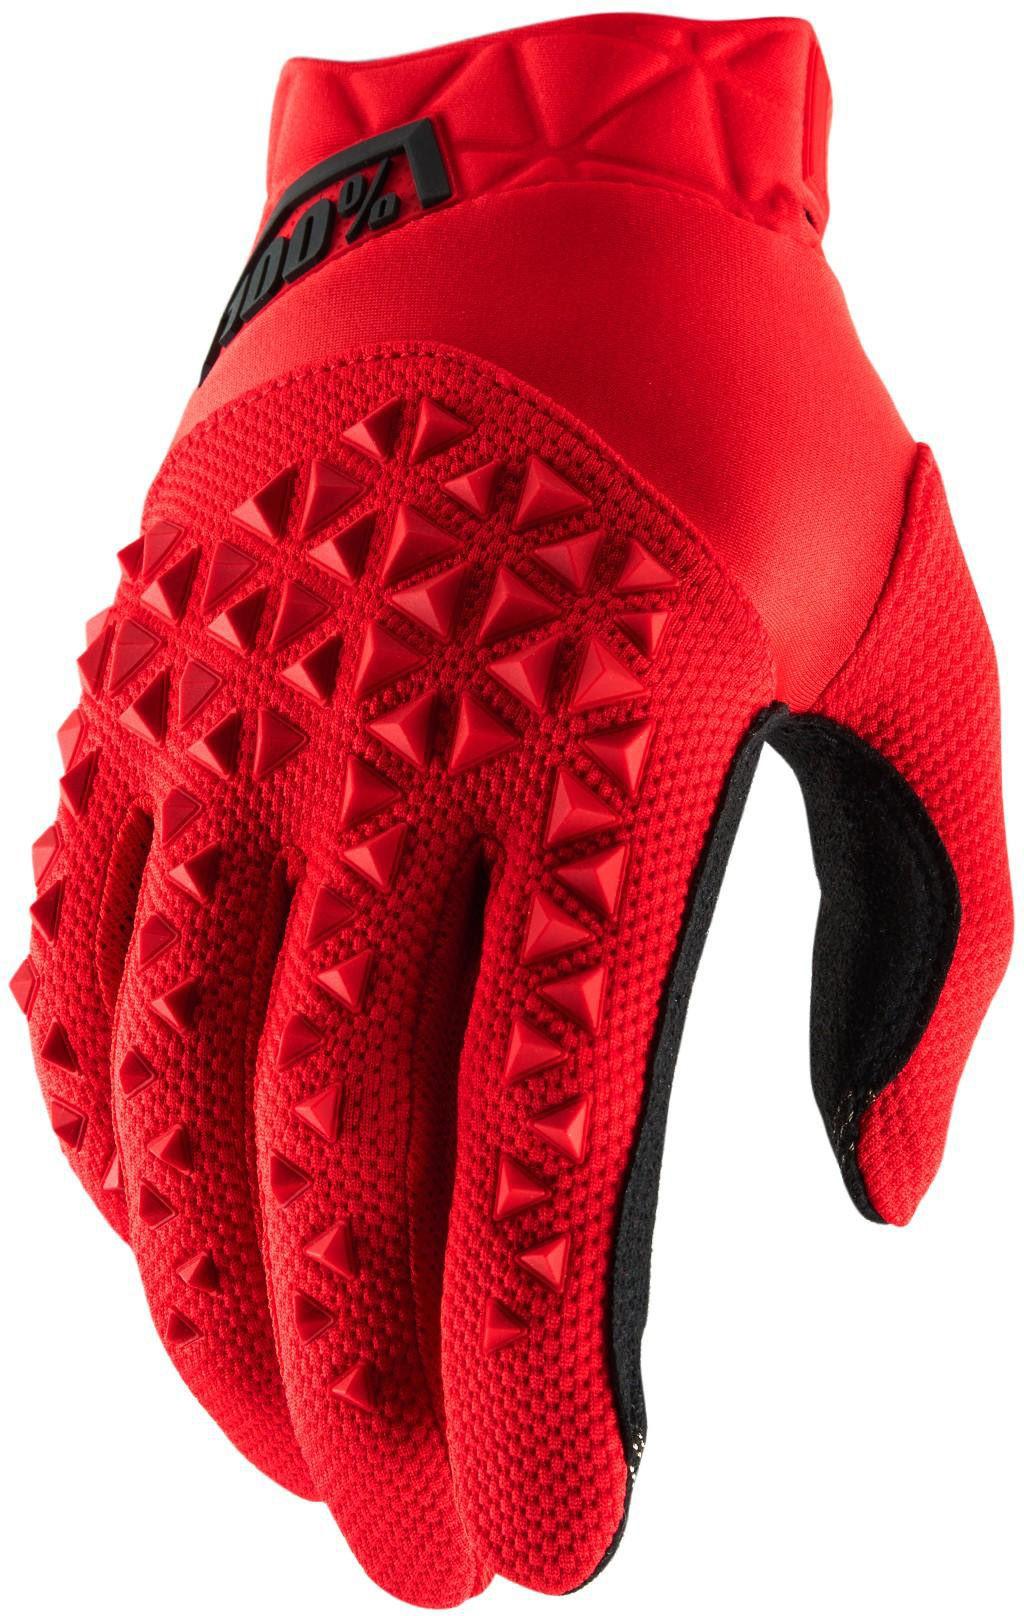 100% Geomatic Gloves - Red